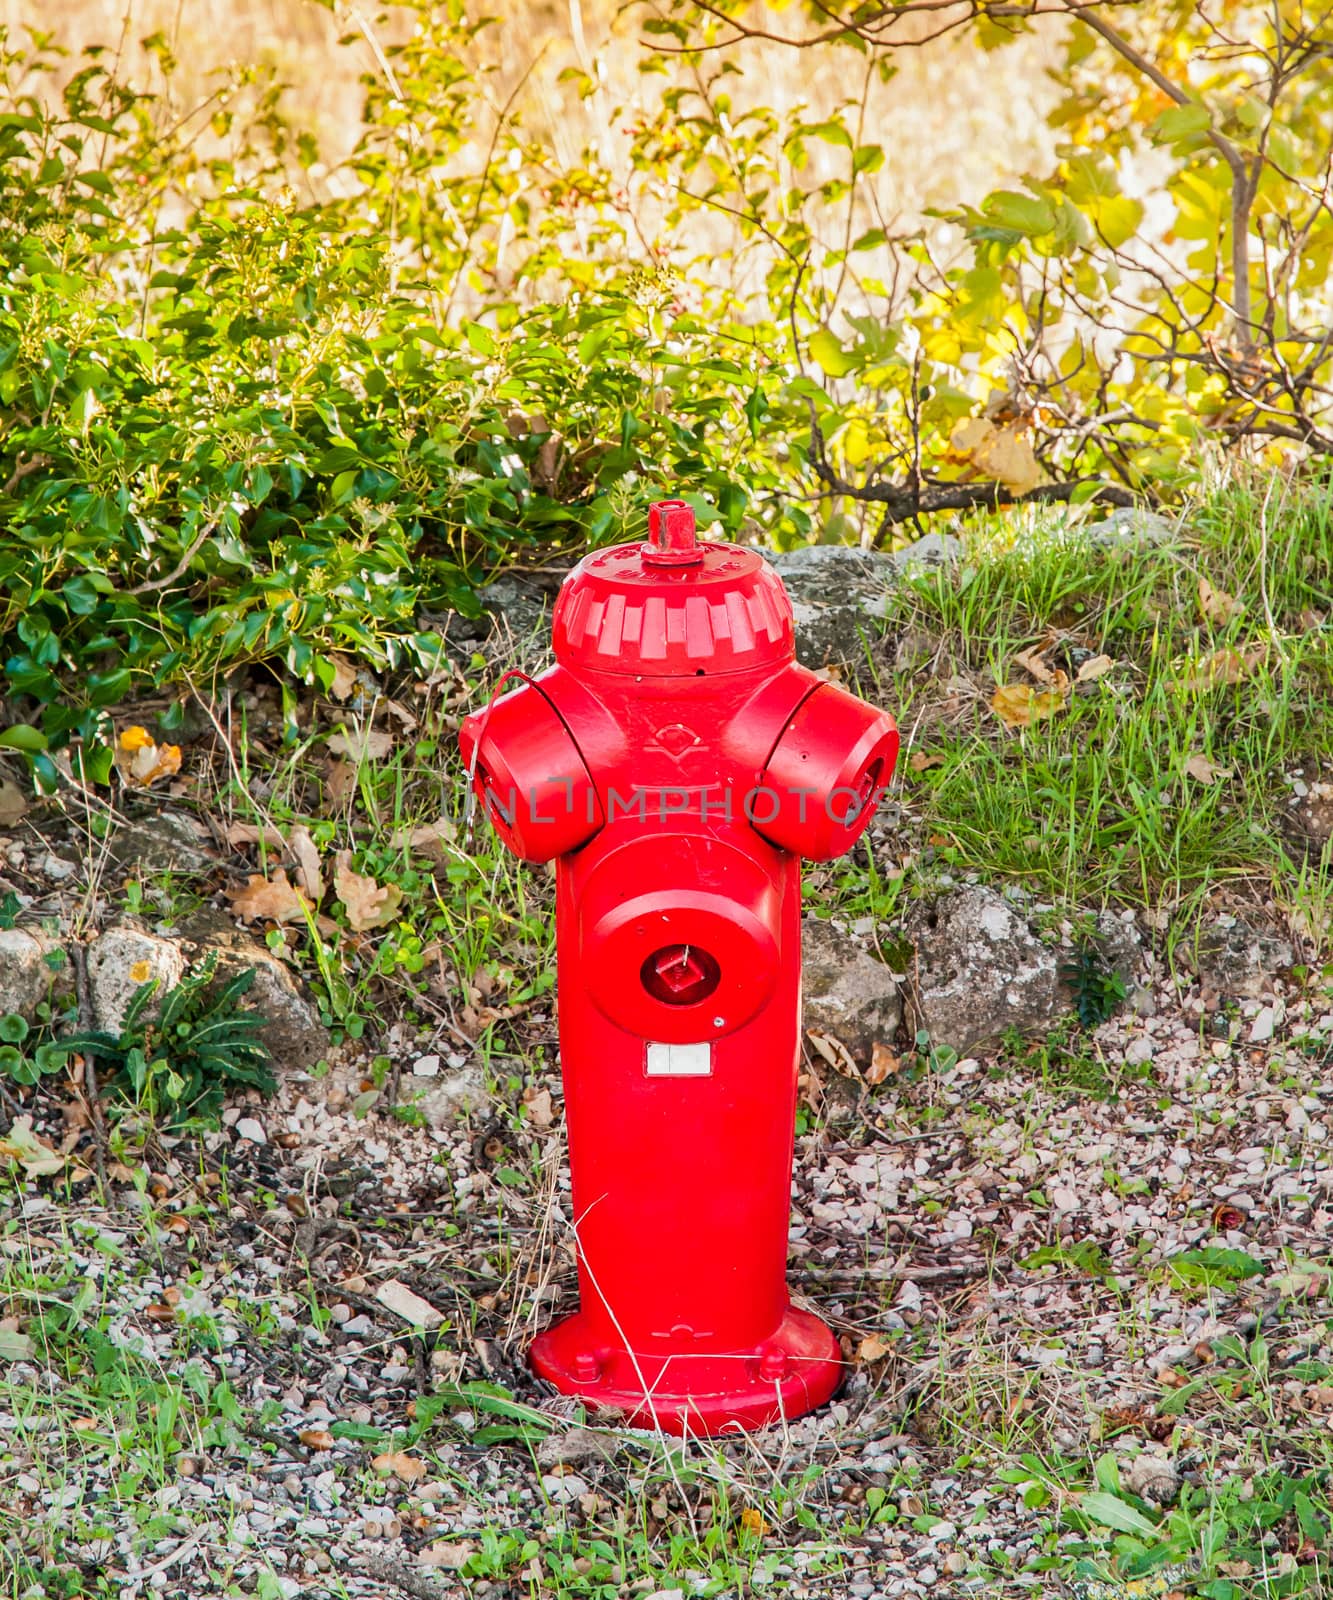 A red hydrant close to a field, in Provence - South of France